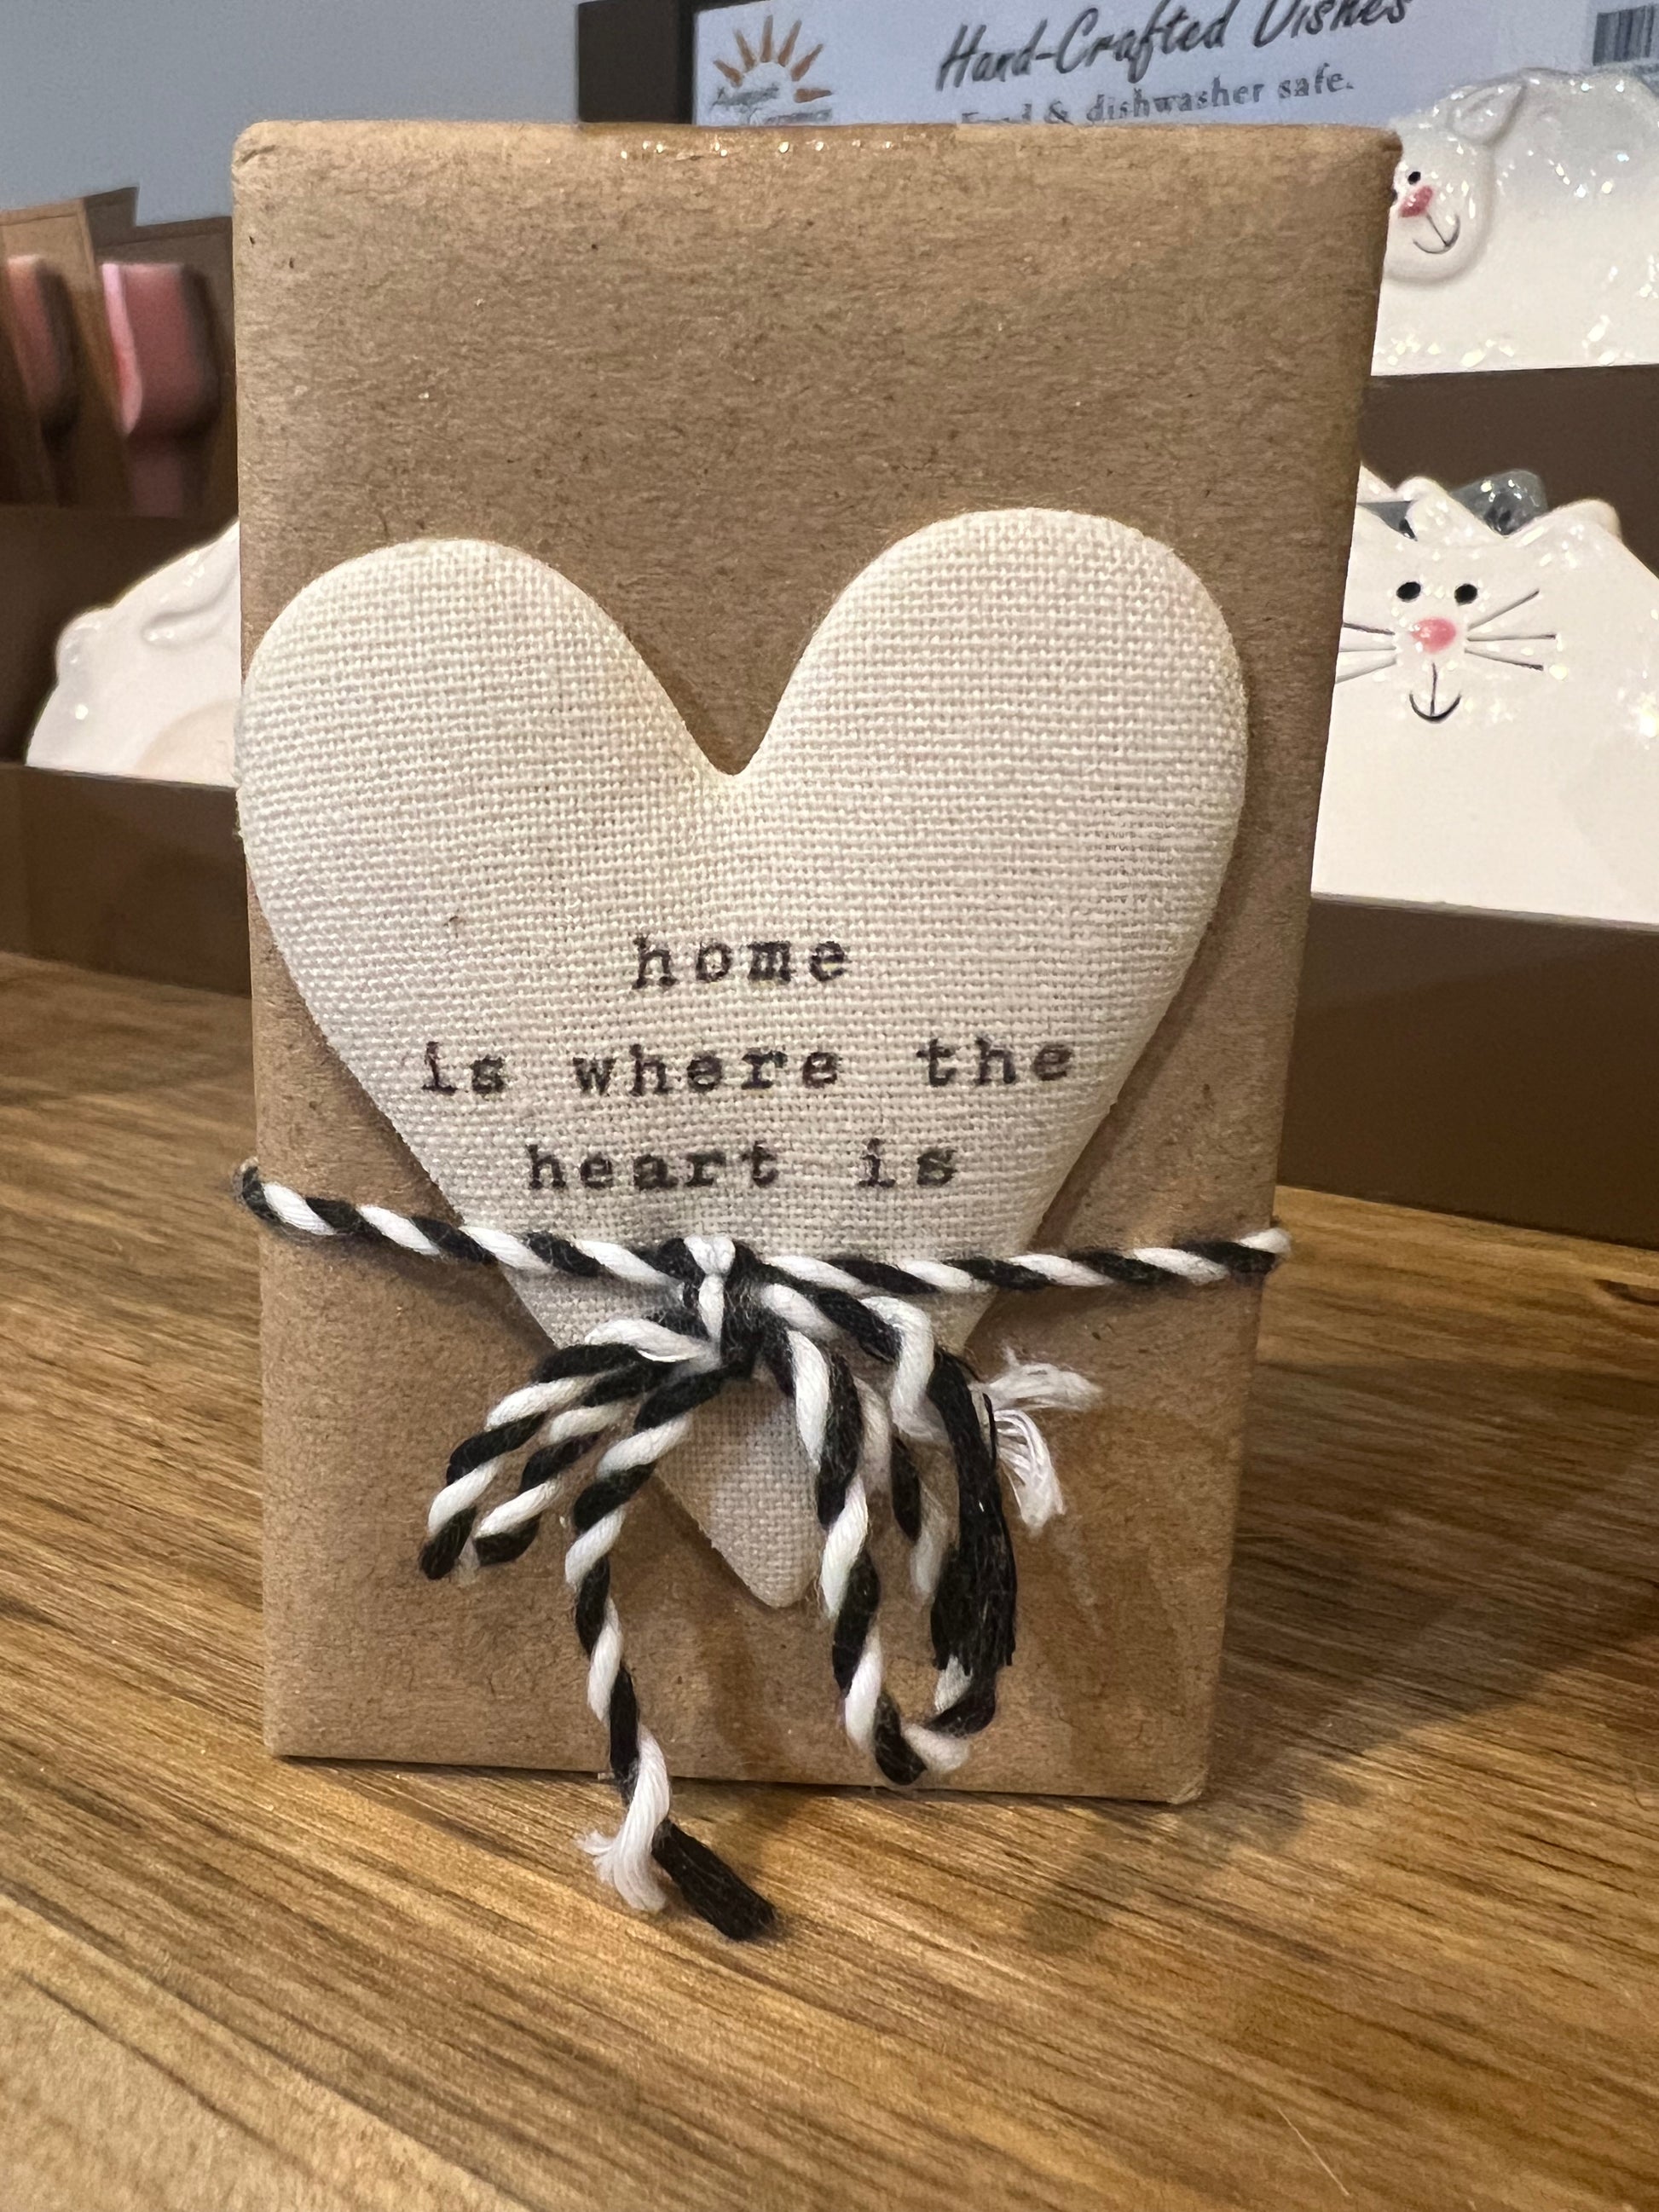 Vanilla Scented Soap Bar with a heart displaying "home is where the heart is".